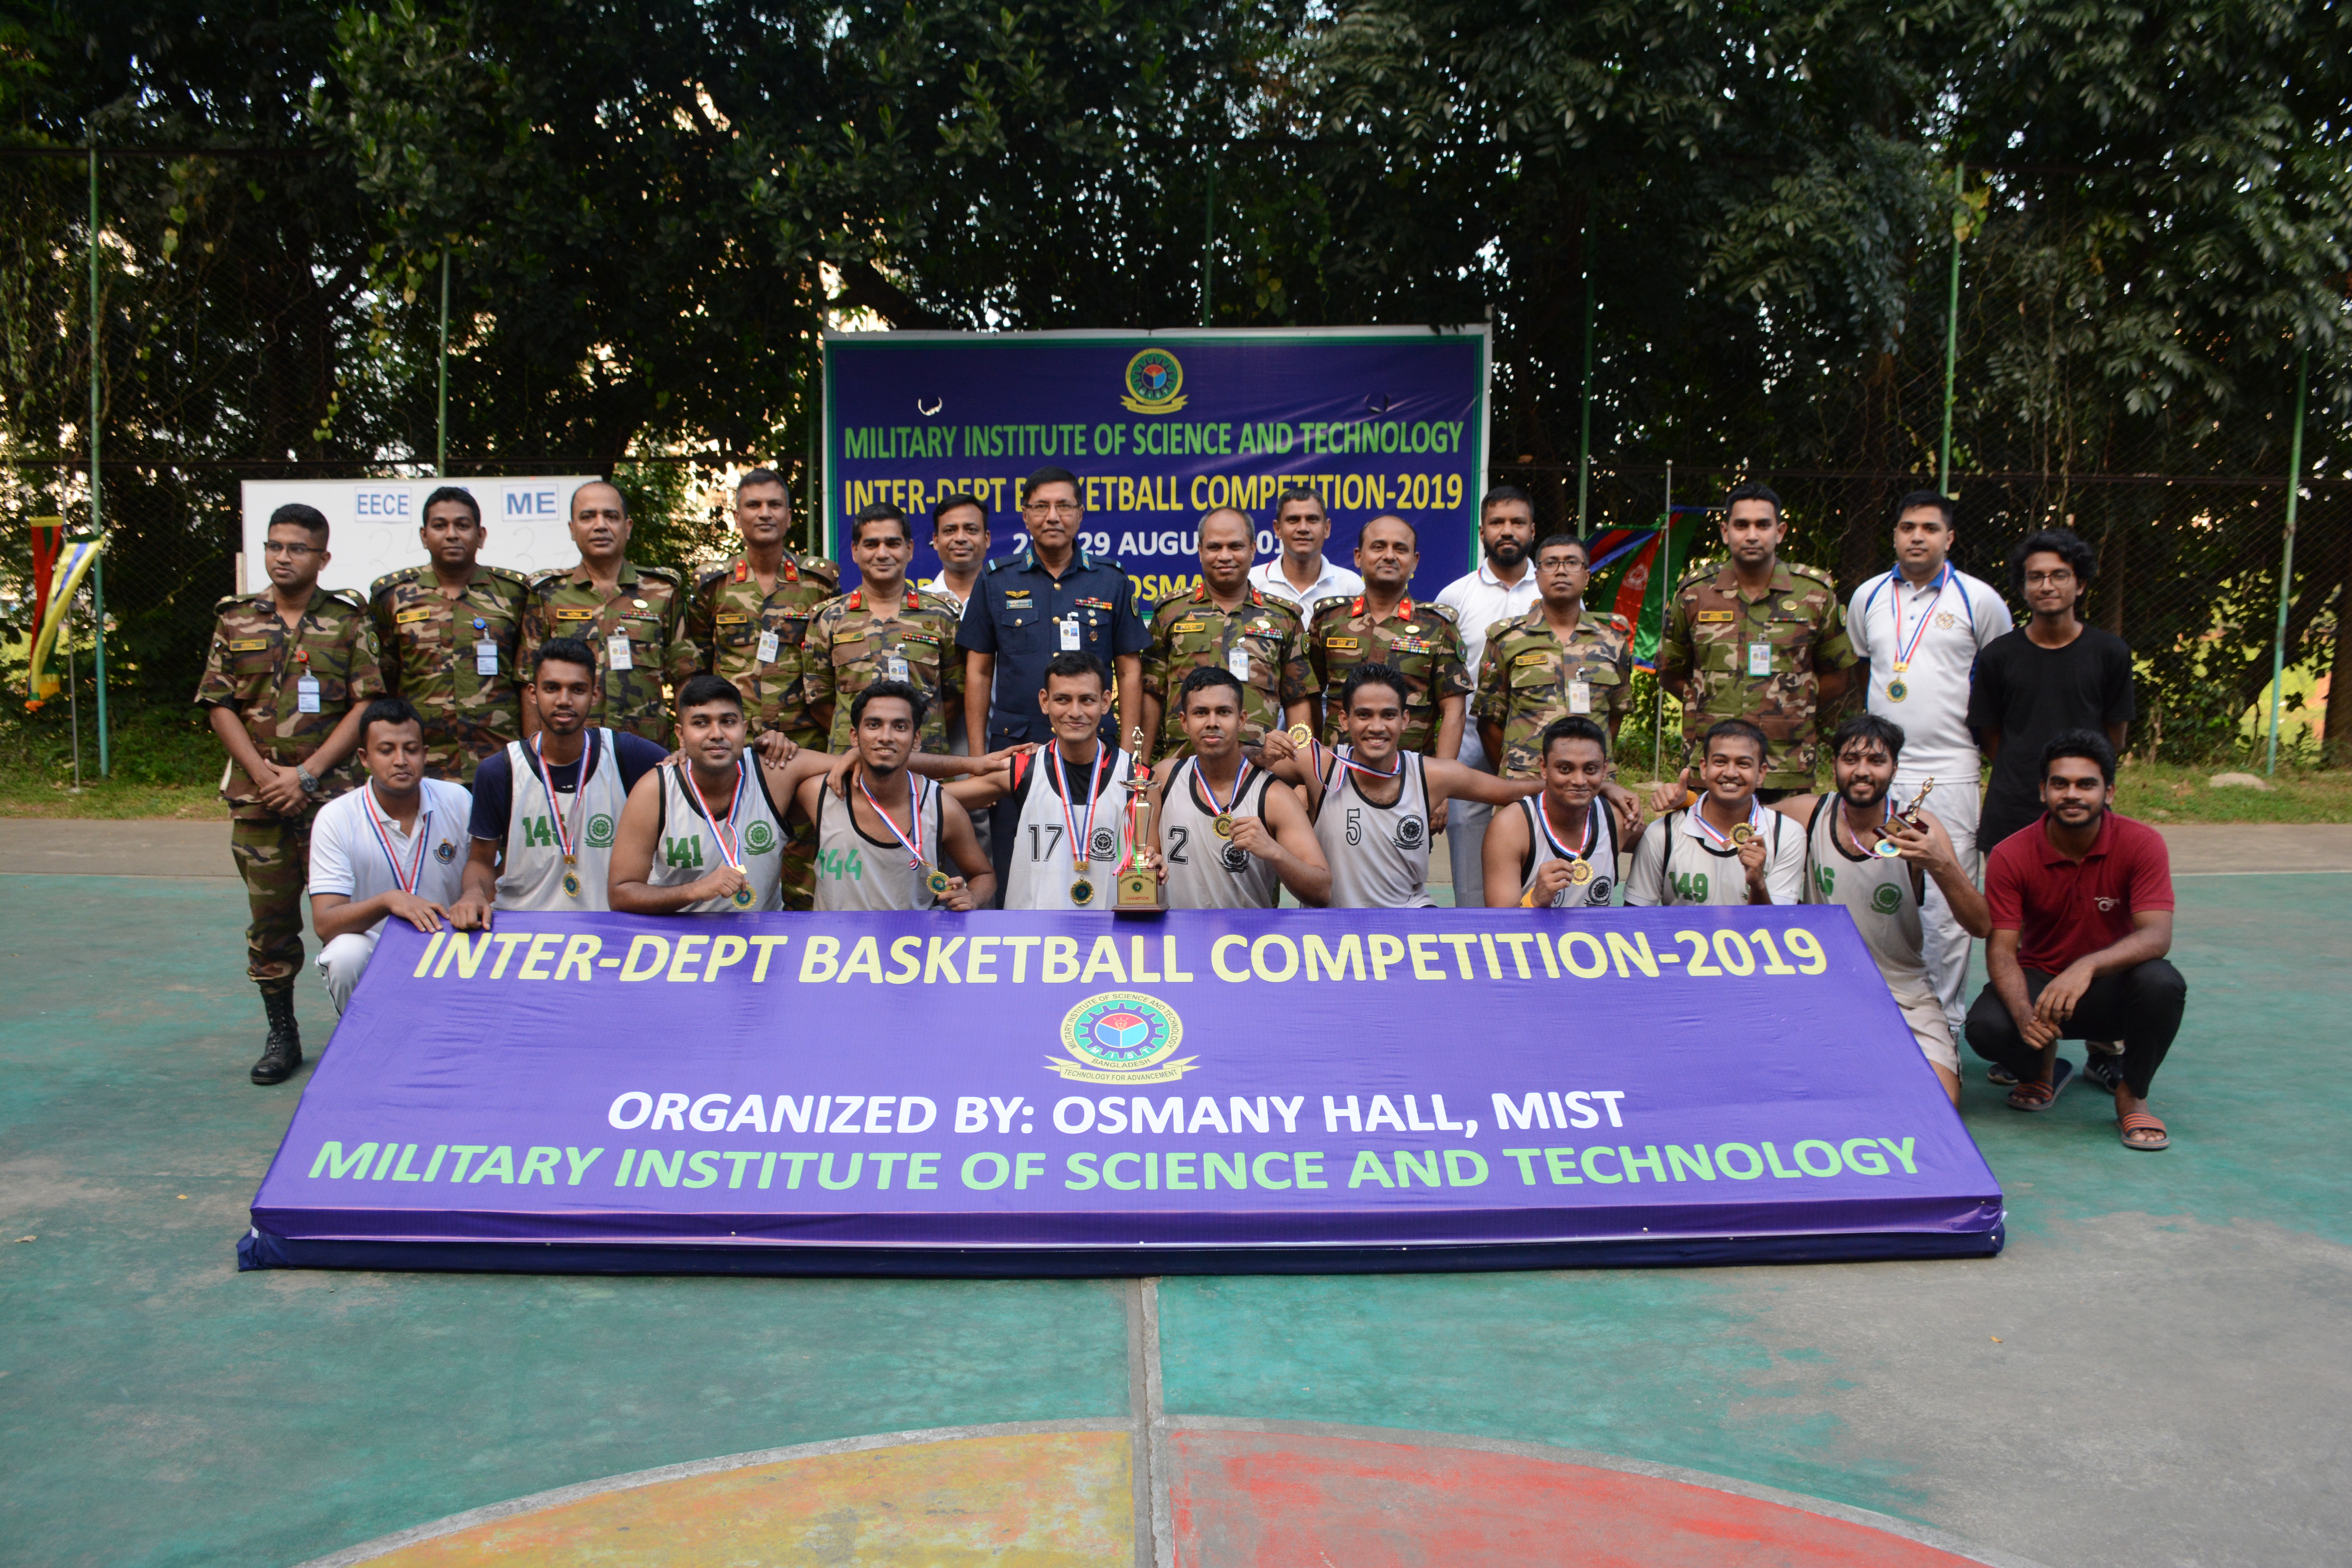 Champion Inter-Dept Basketball Competition-2019